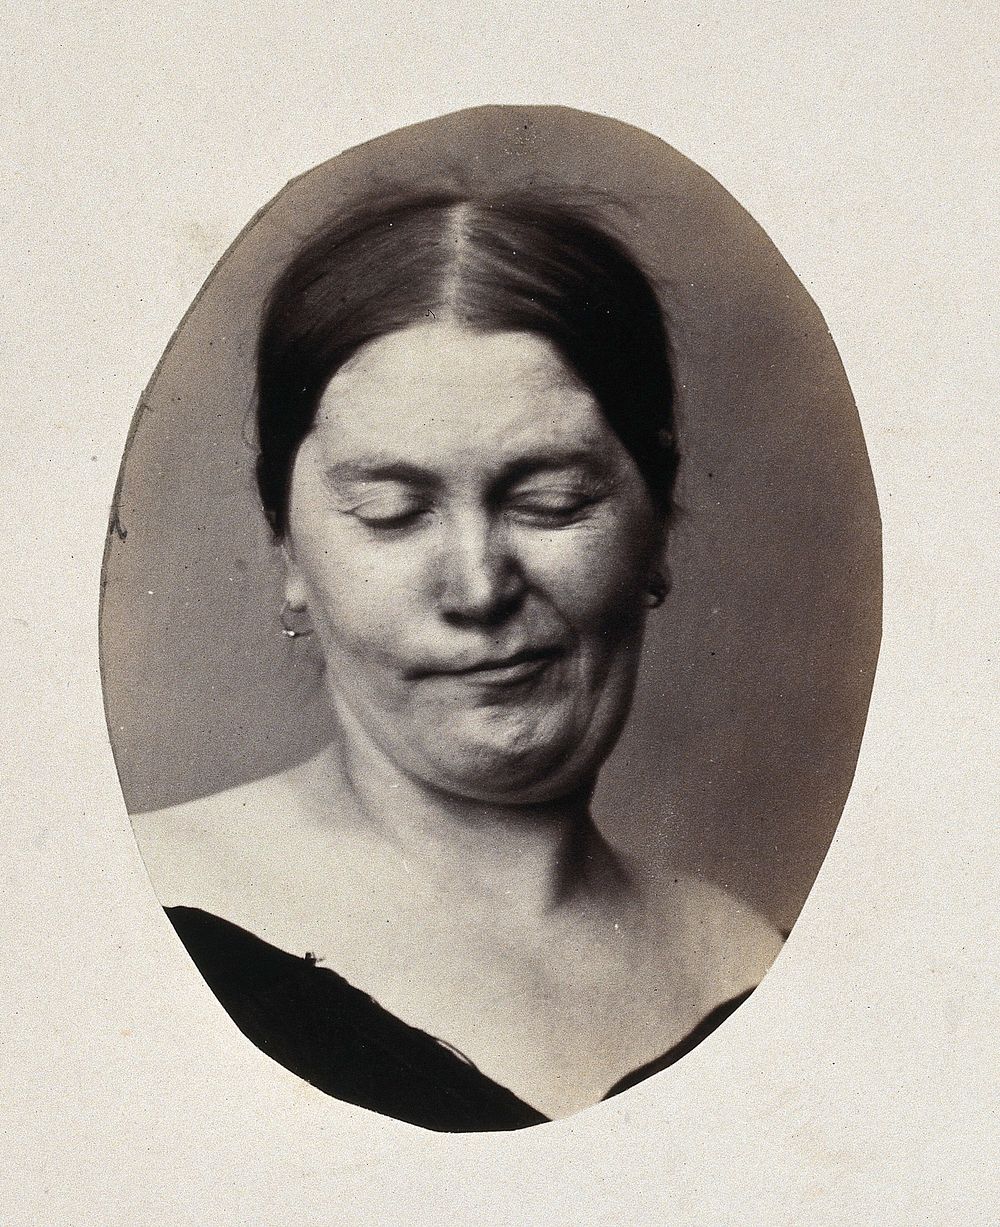 A woman's head and neck; her eyes are closed and her mouth twisted into a grimace. Photograph by L. Haase after H.W. Berend…